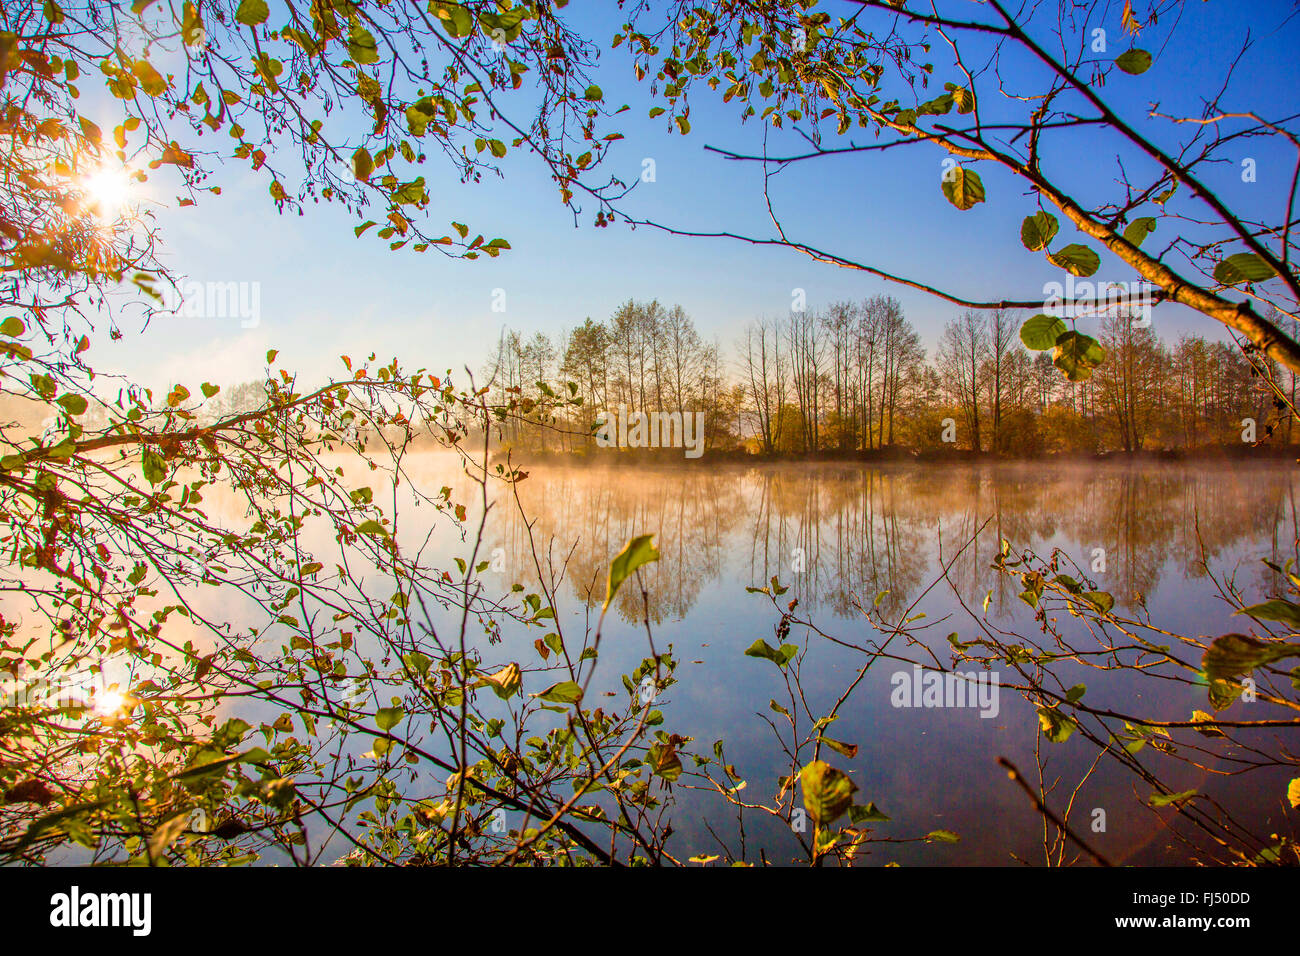 midday sun over a pond in autumn, Germany, Bavaria, Niederbayern, Lower Bavaria, Atting Stock Photo